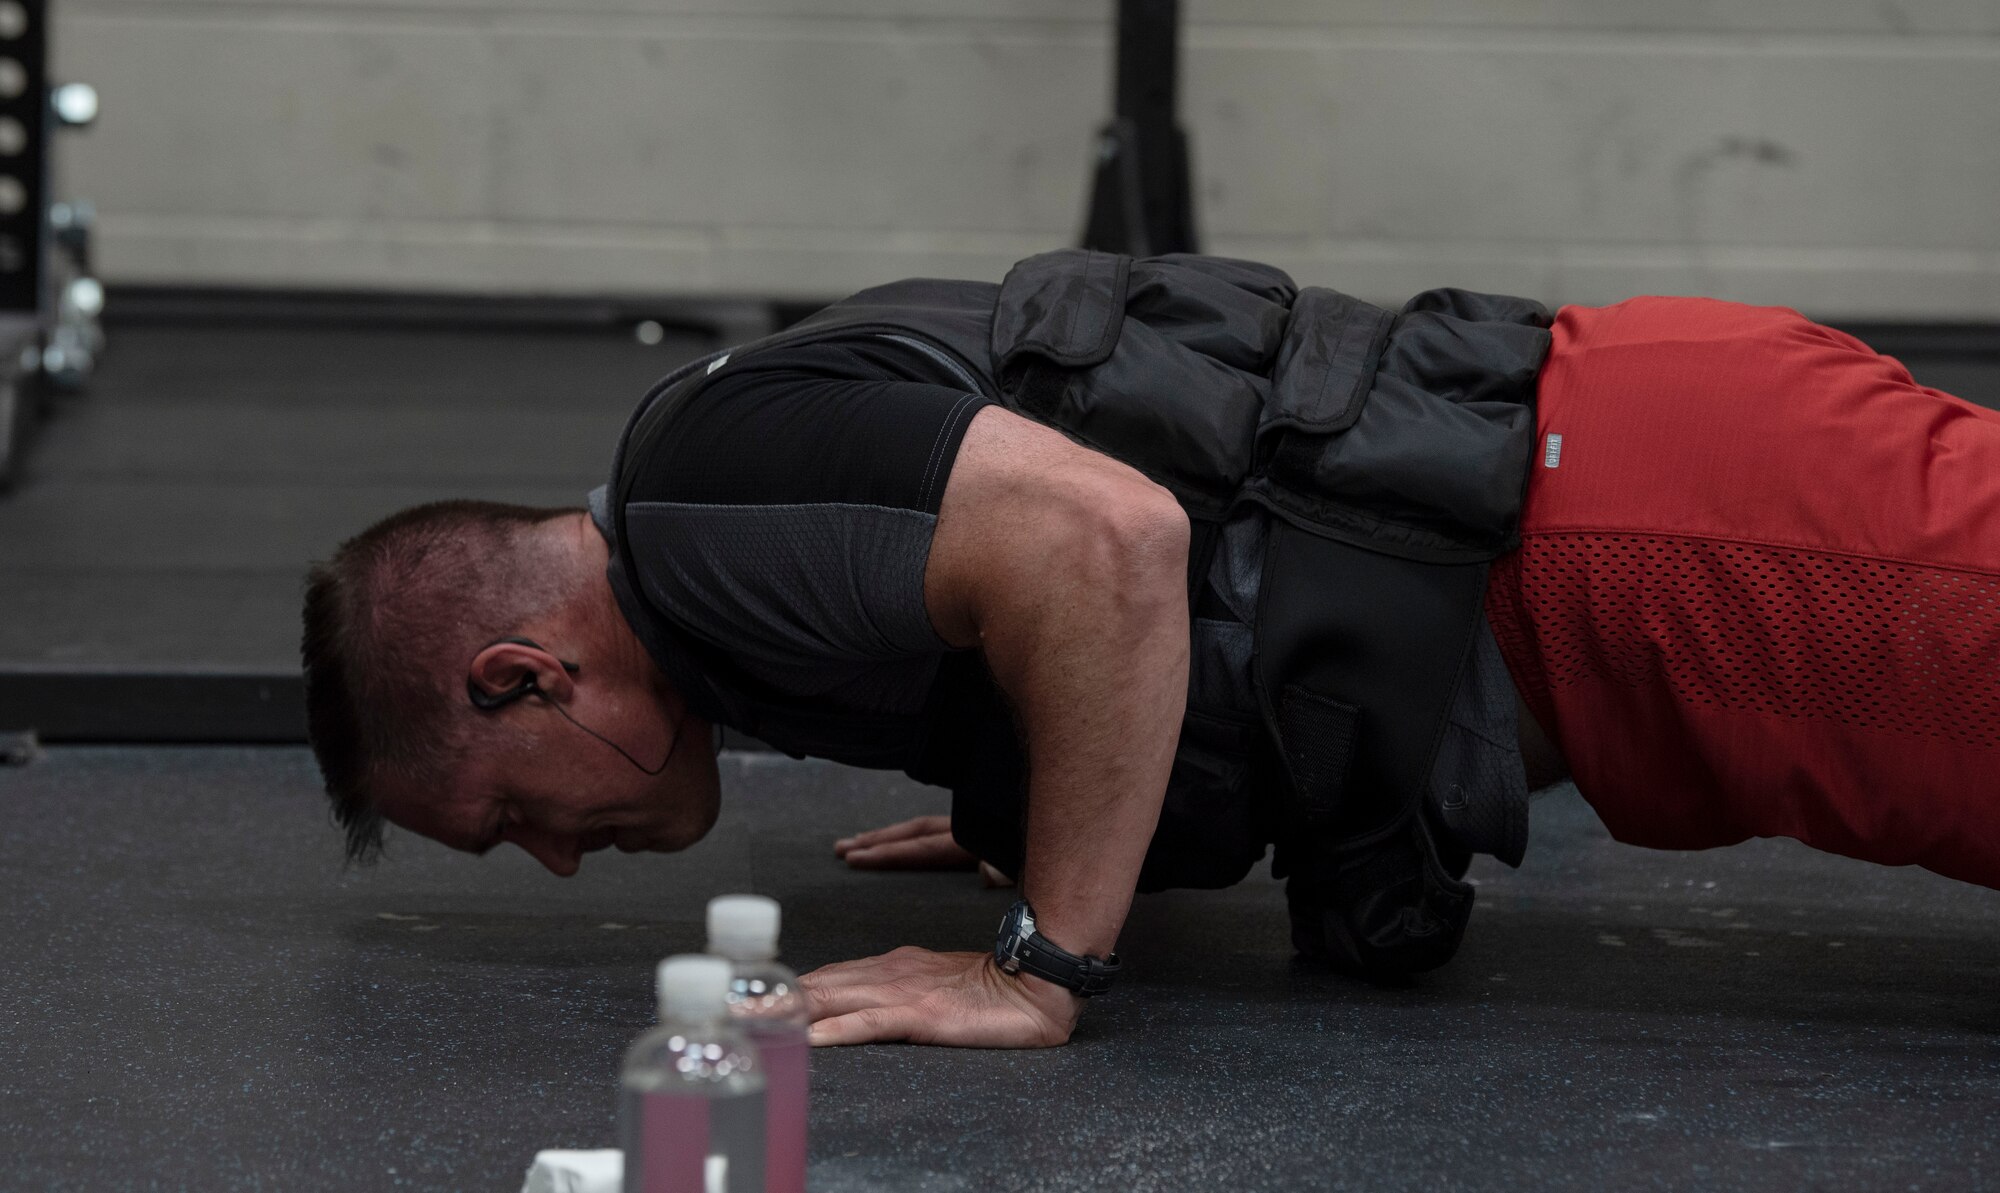 U.S. Air Force Col. Hall Sebren, 20th Maintenance Group commander, does a set of pushups during the strength section of a “Murph challenge” at Shaw Air Force Base, South Carolina, May 28, 2019.